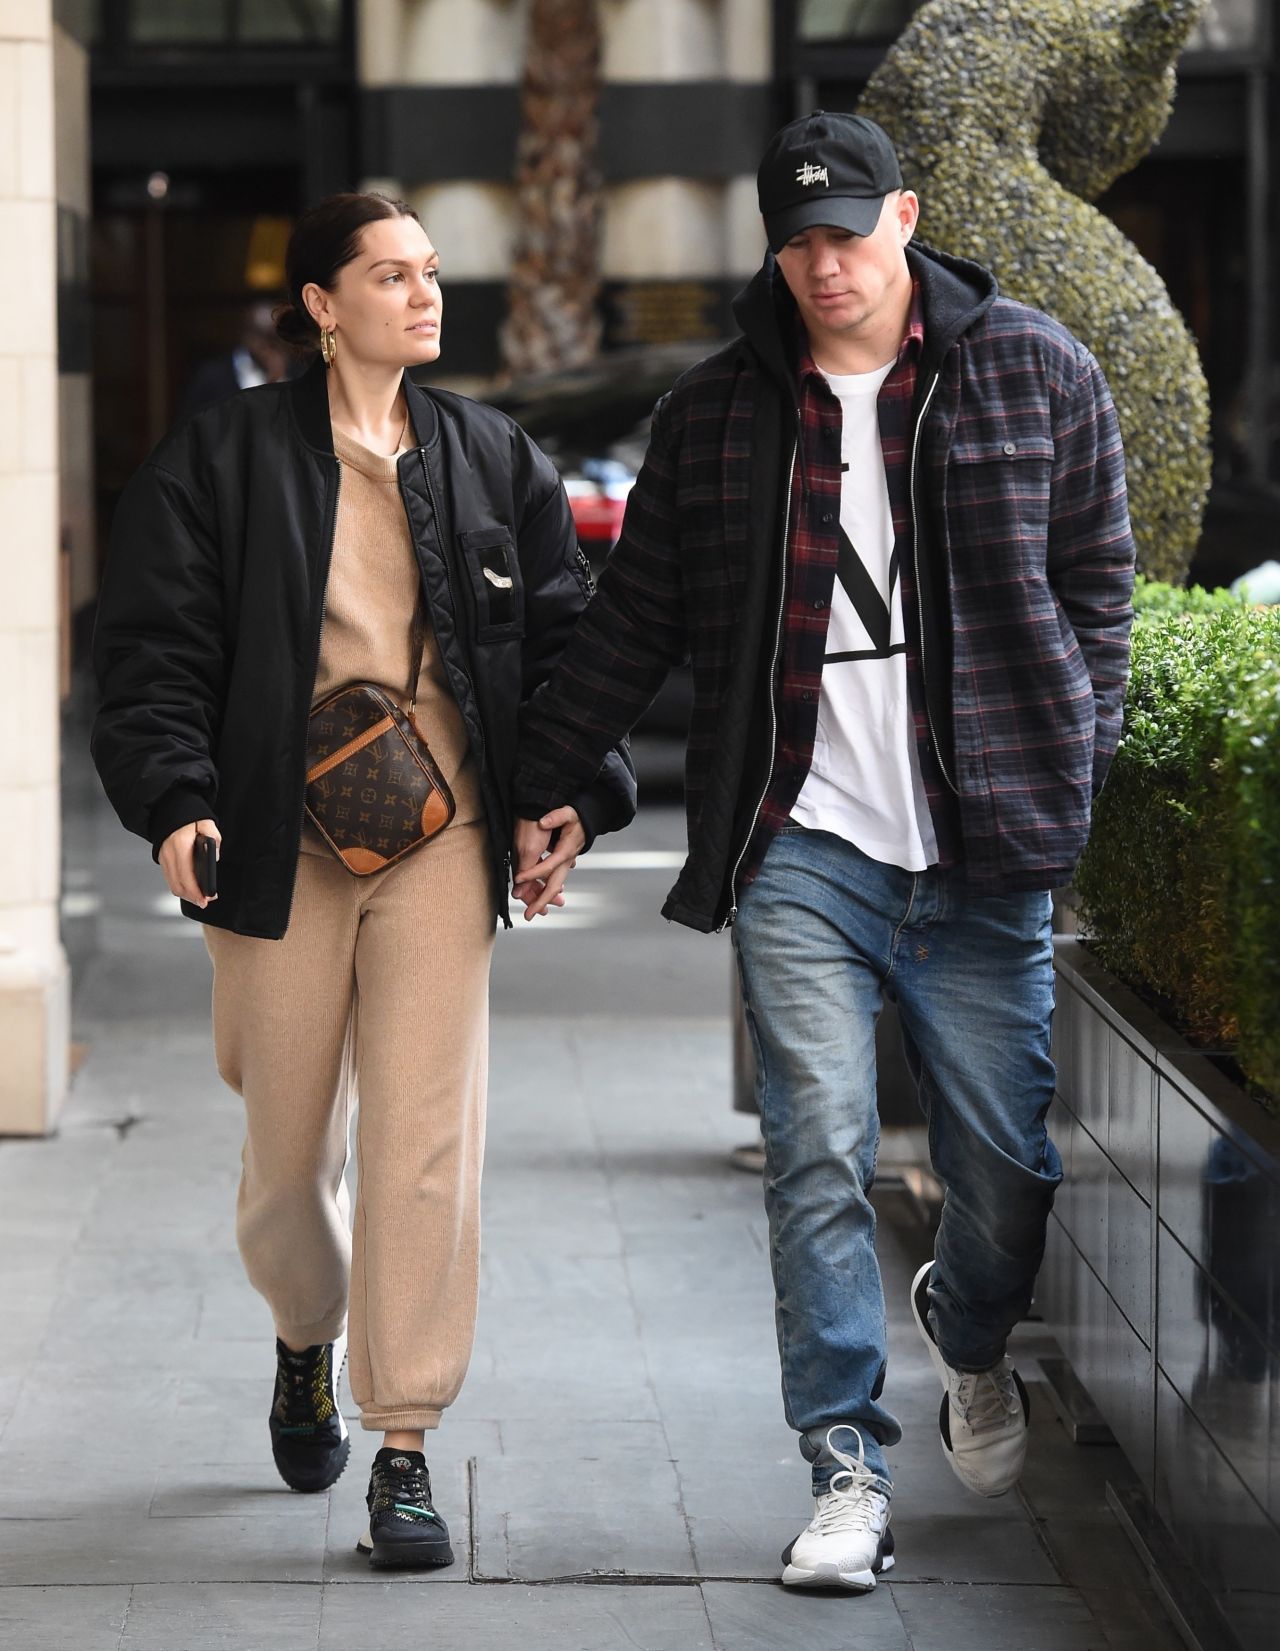 Jessie J and Channing Tatum - Out in London 03/14/20191280 x 1651